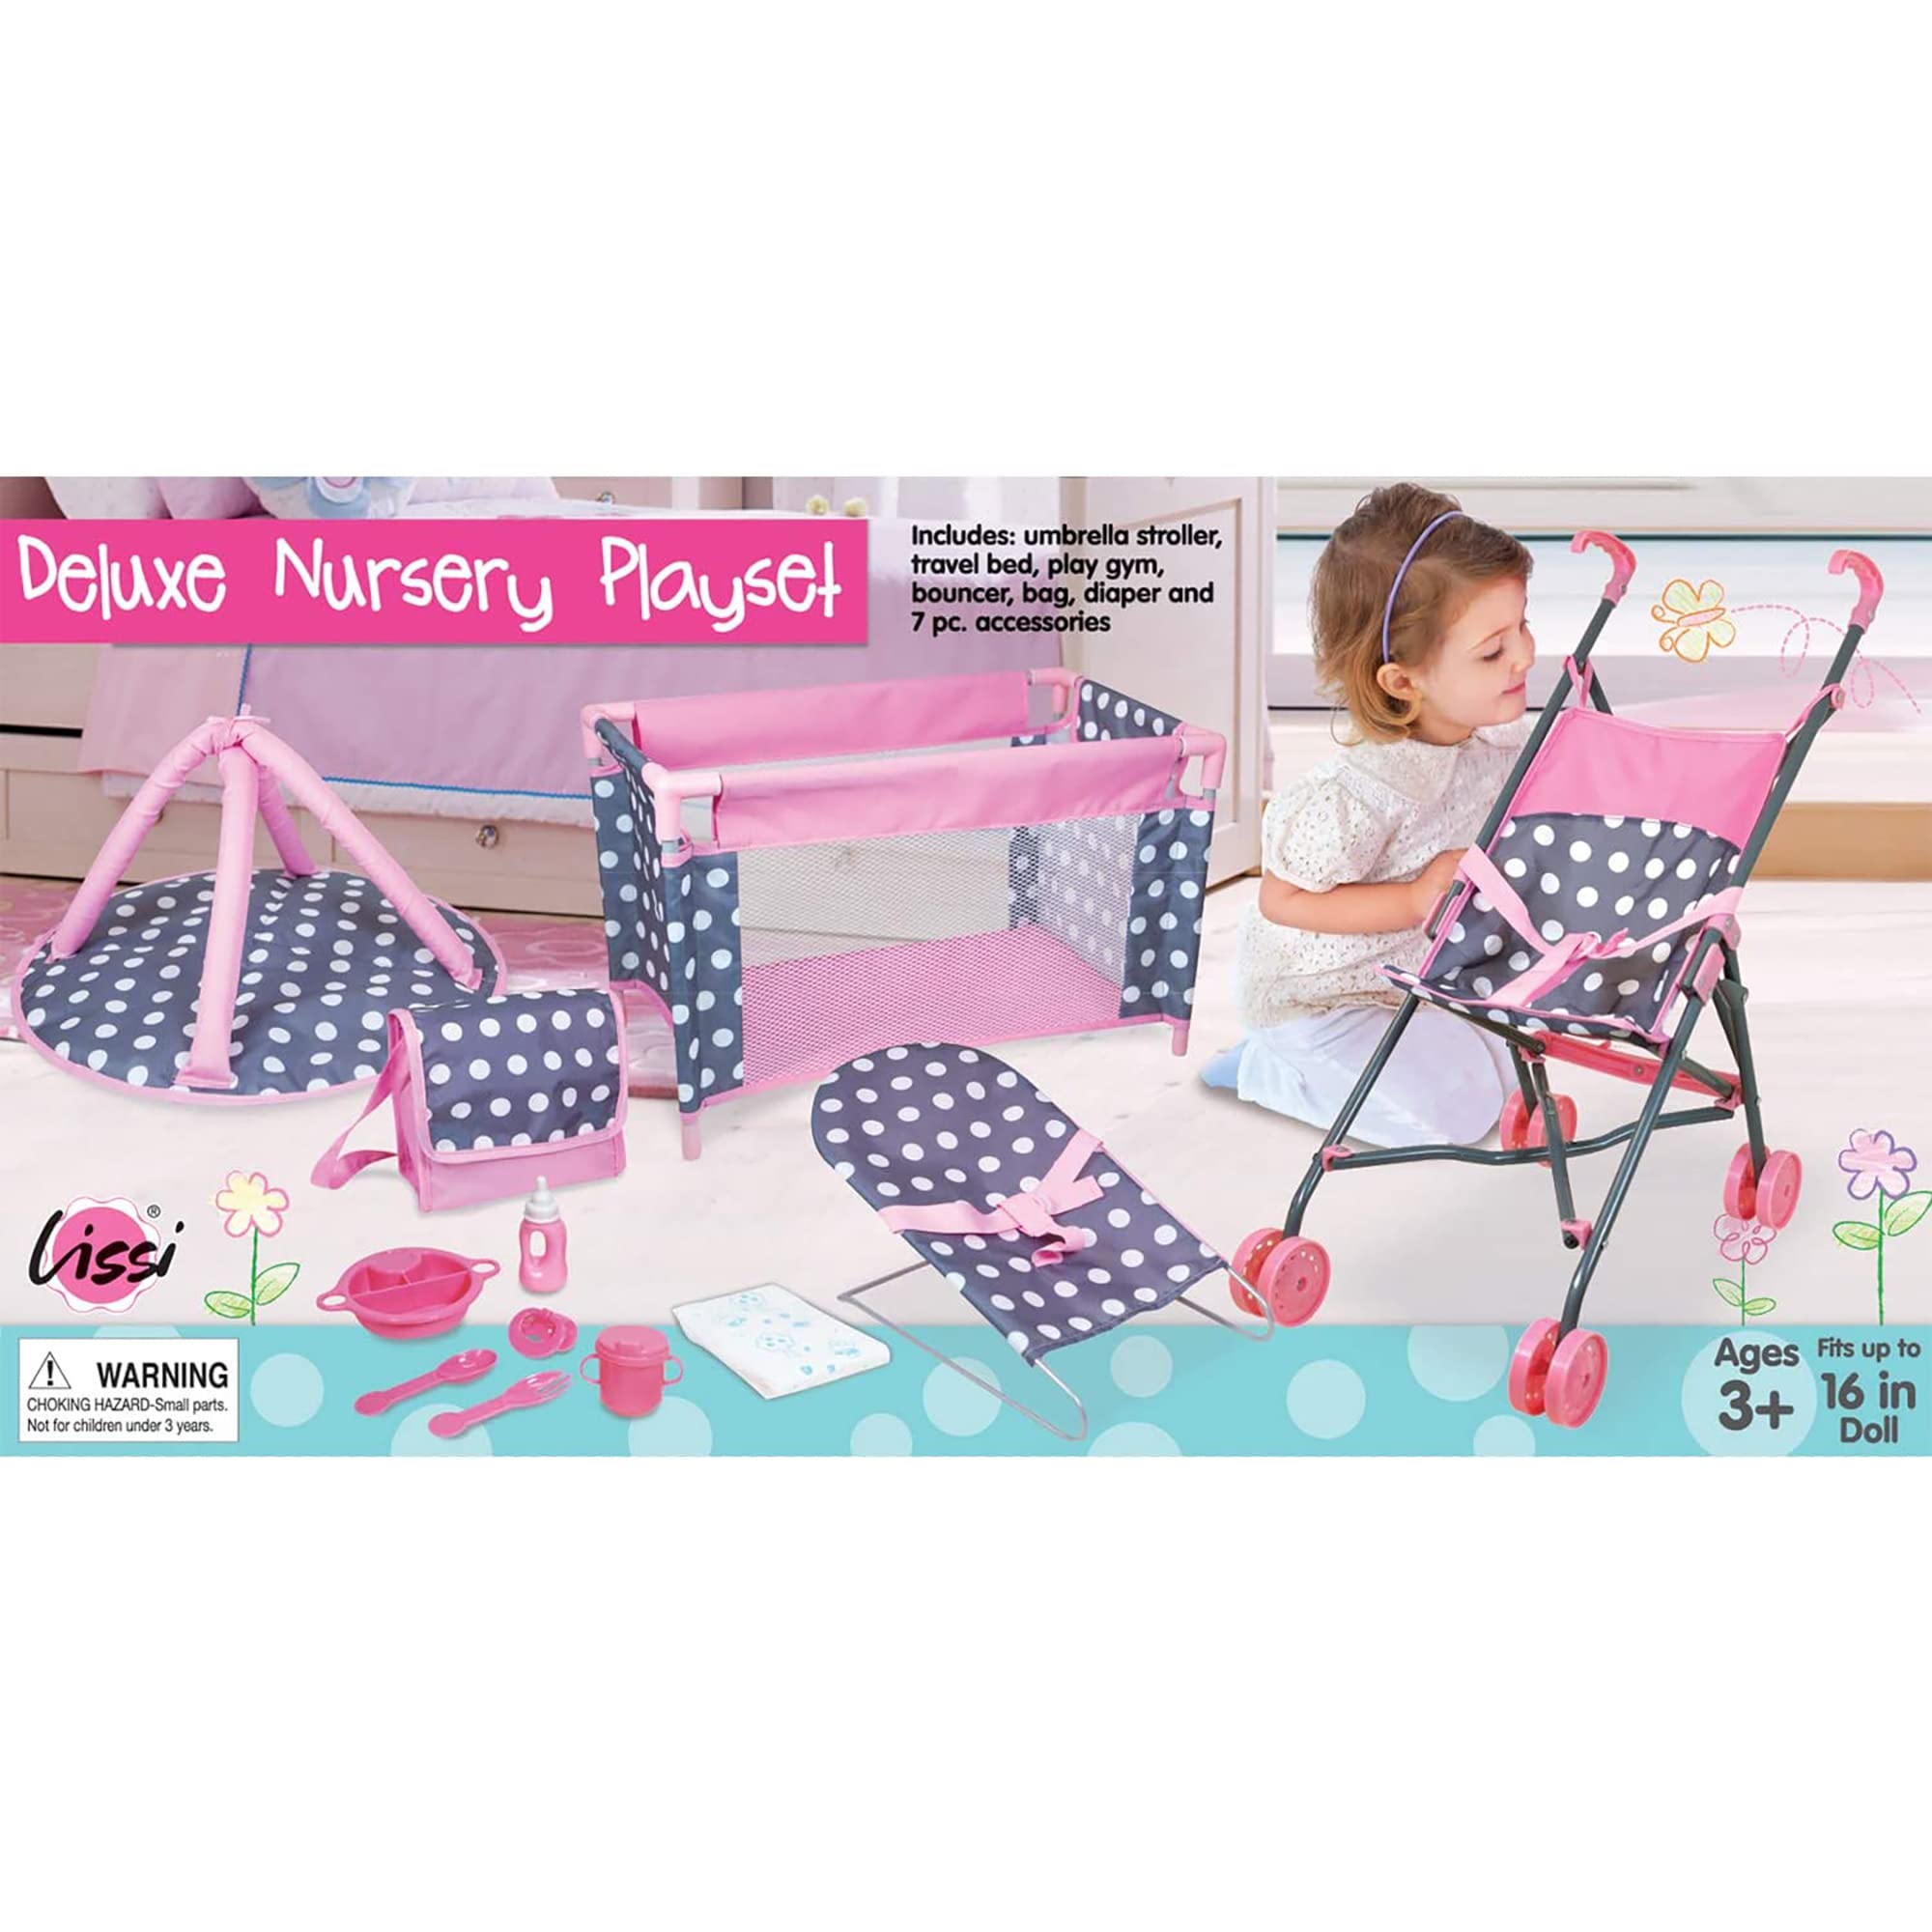 Lissi 5 Piece Doll Deluxe Nursery Play Set with Accessories